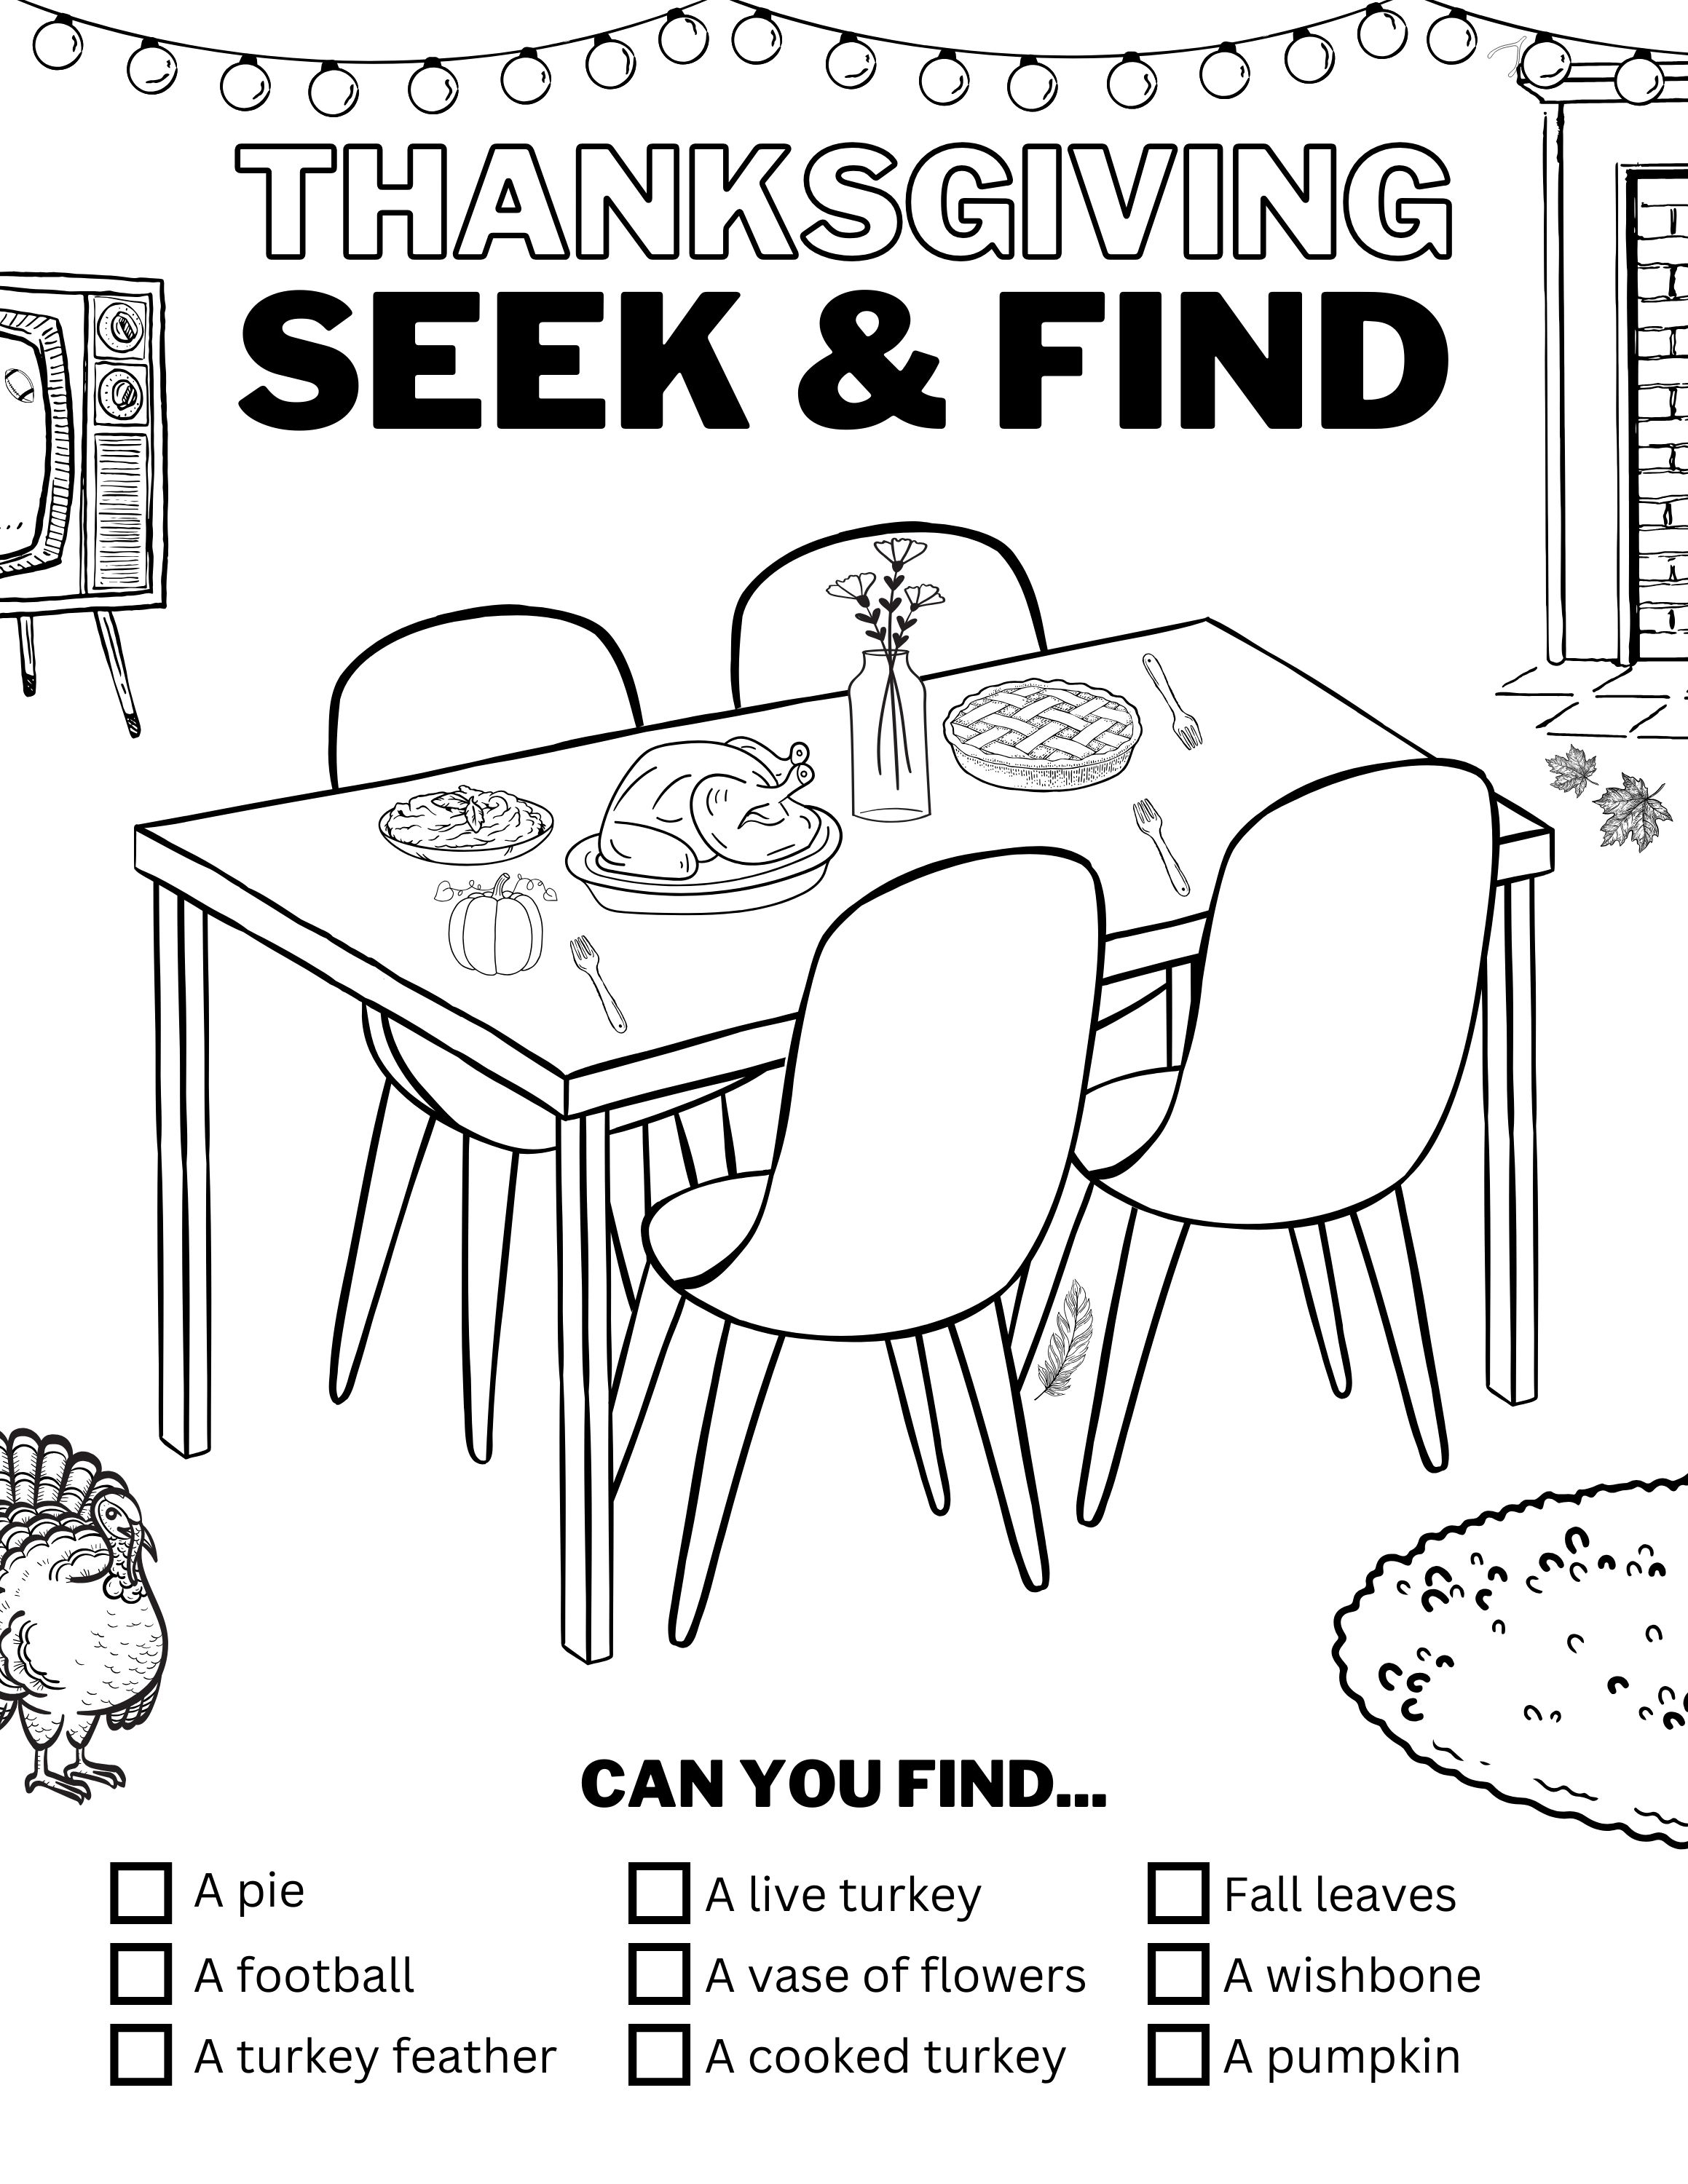 Free thanksgiving coloring pages activities for kids